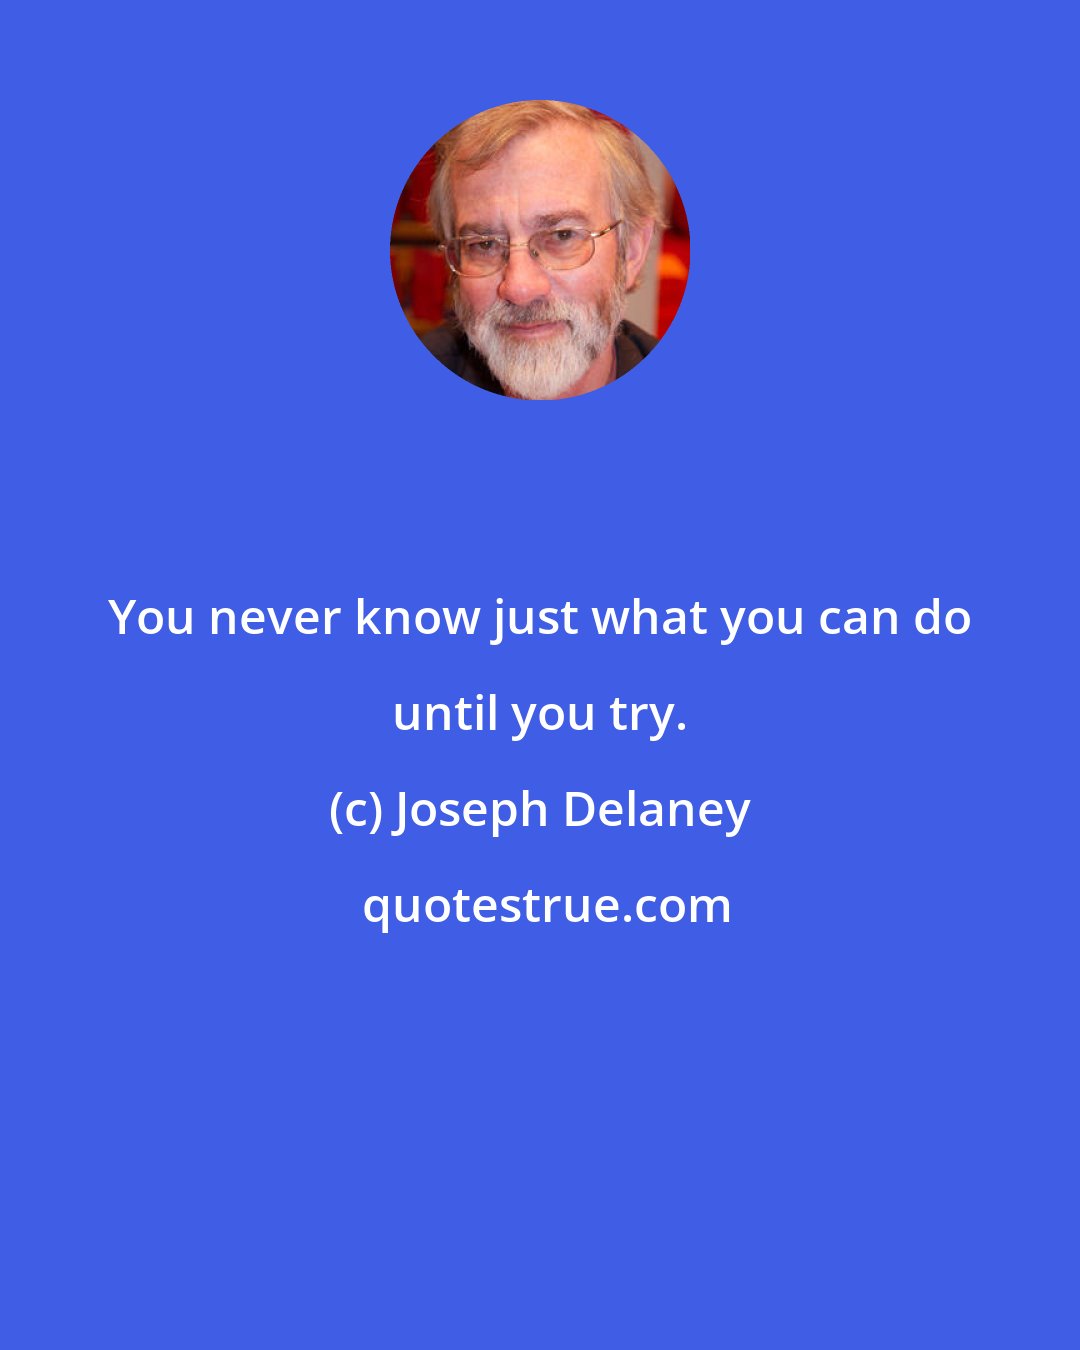 Joseph Delaney: You never know just what you can do until you try.